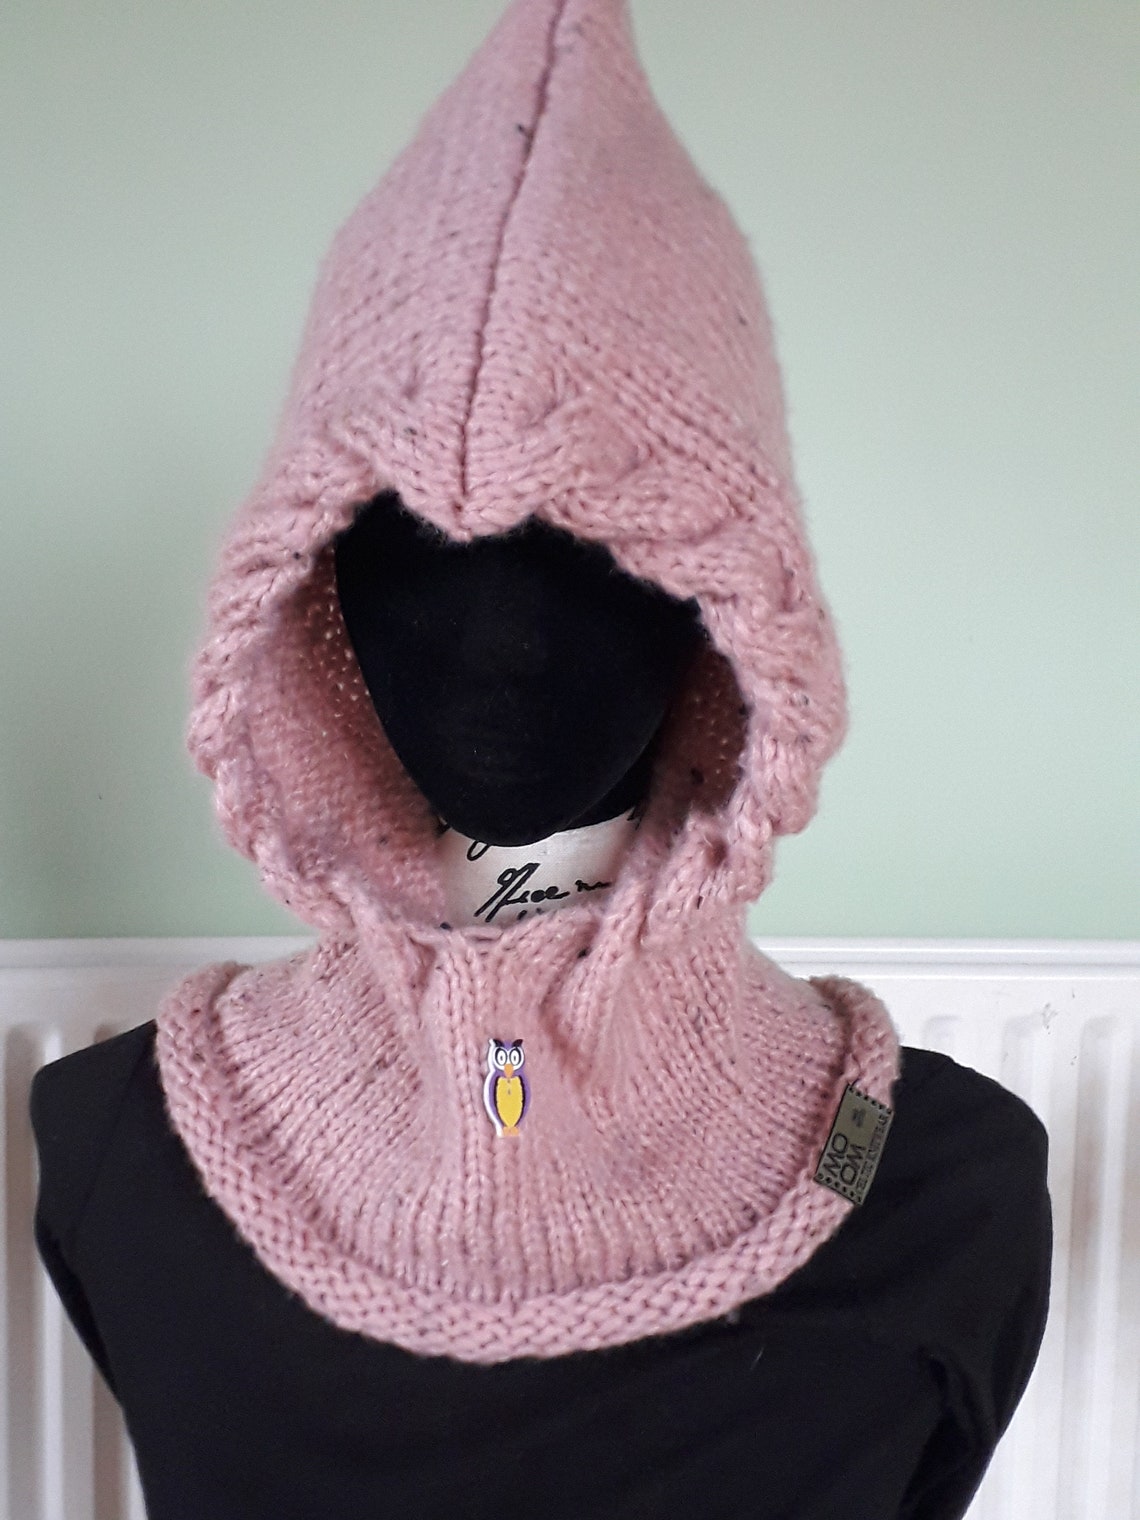 Hooded cowl | Etsy